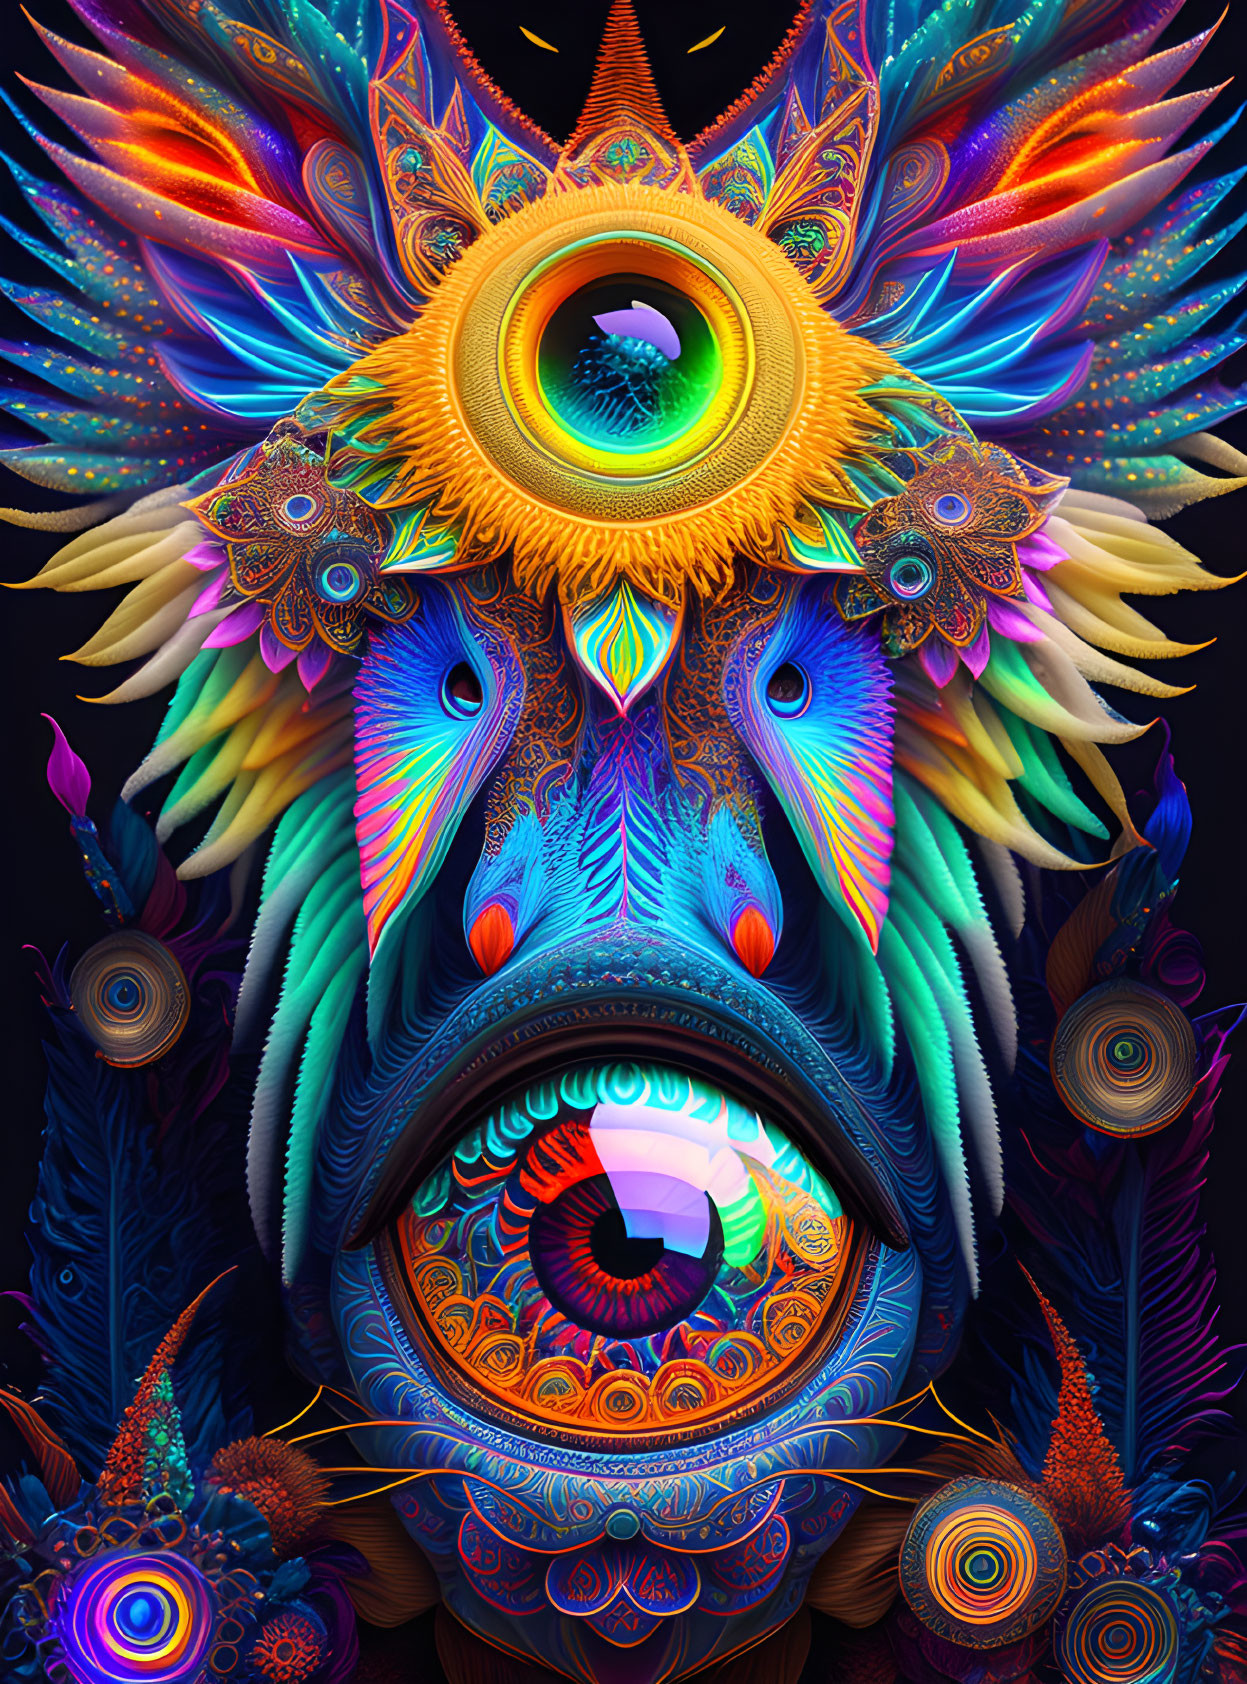 Symmetrical digital art with central eye motif and colorful animal patterns